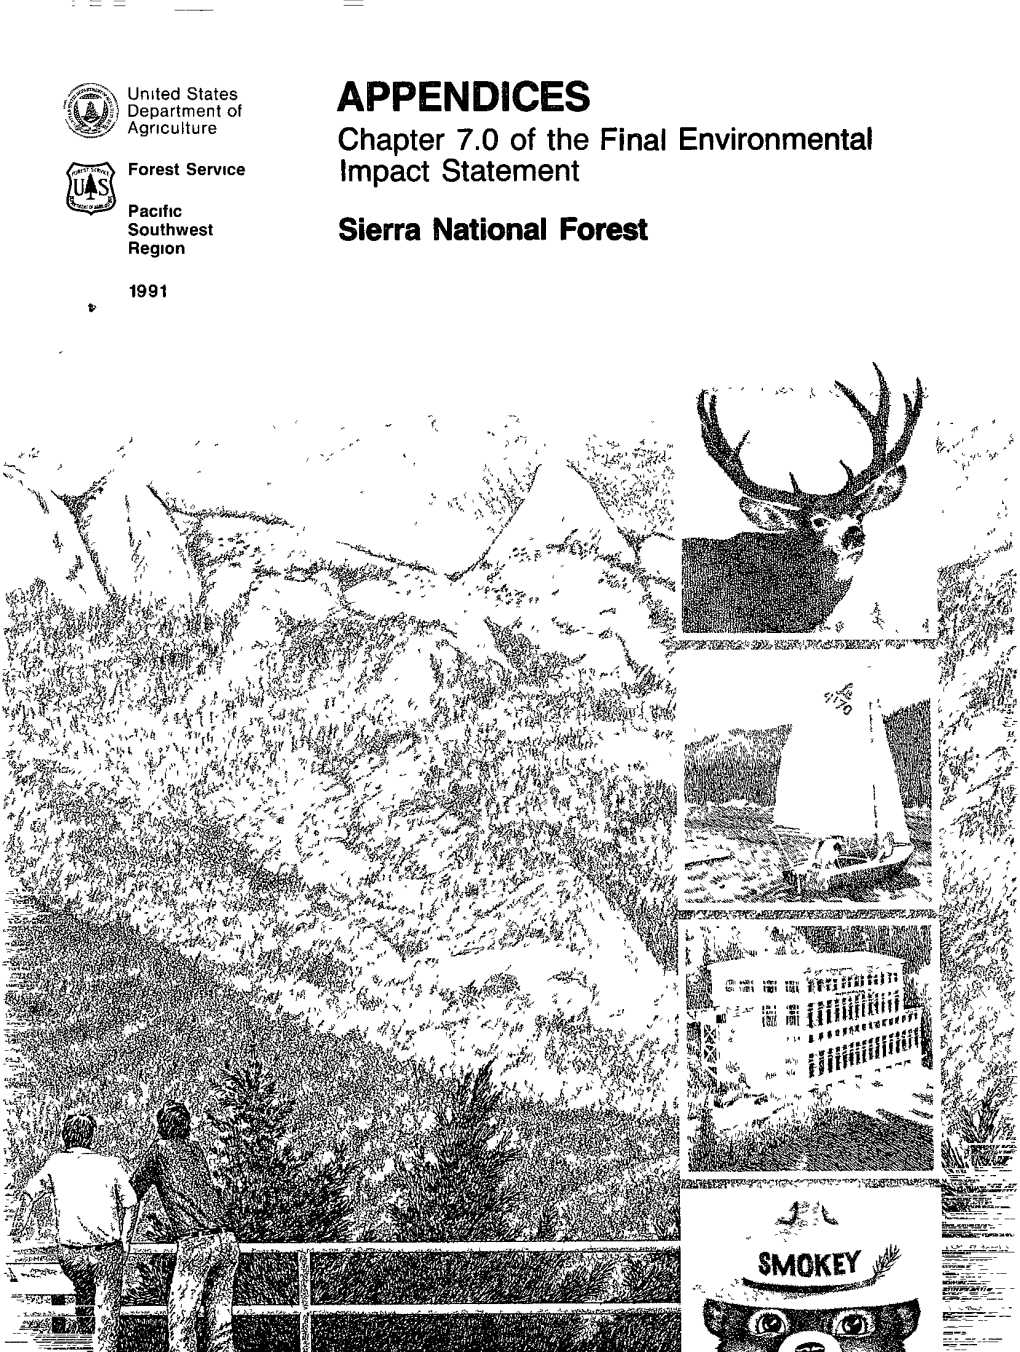 APPENDICES Agriculture Chapter 7.0 of the Final Environmental @*Il--"Nr Forest Service Impact Statement Pacific Southwest Sierra National Forest Region